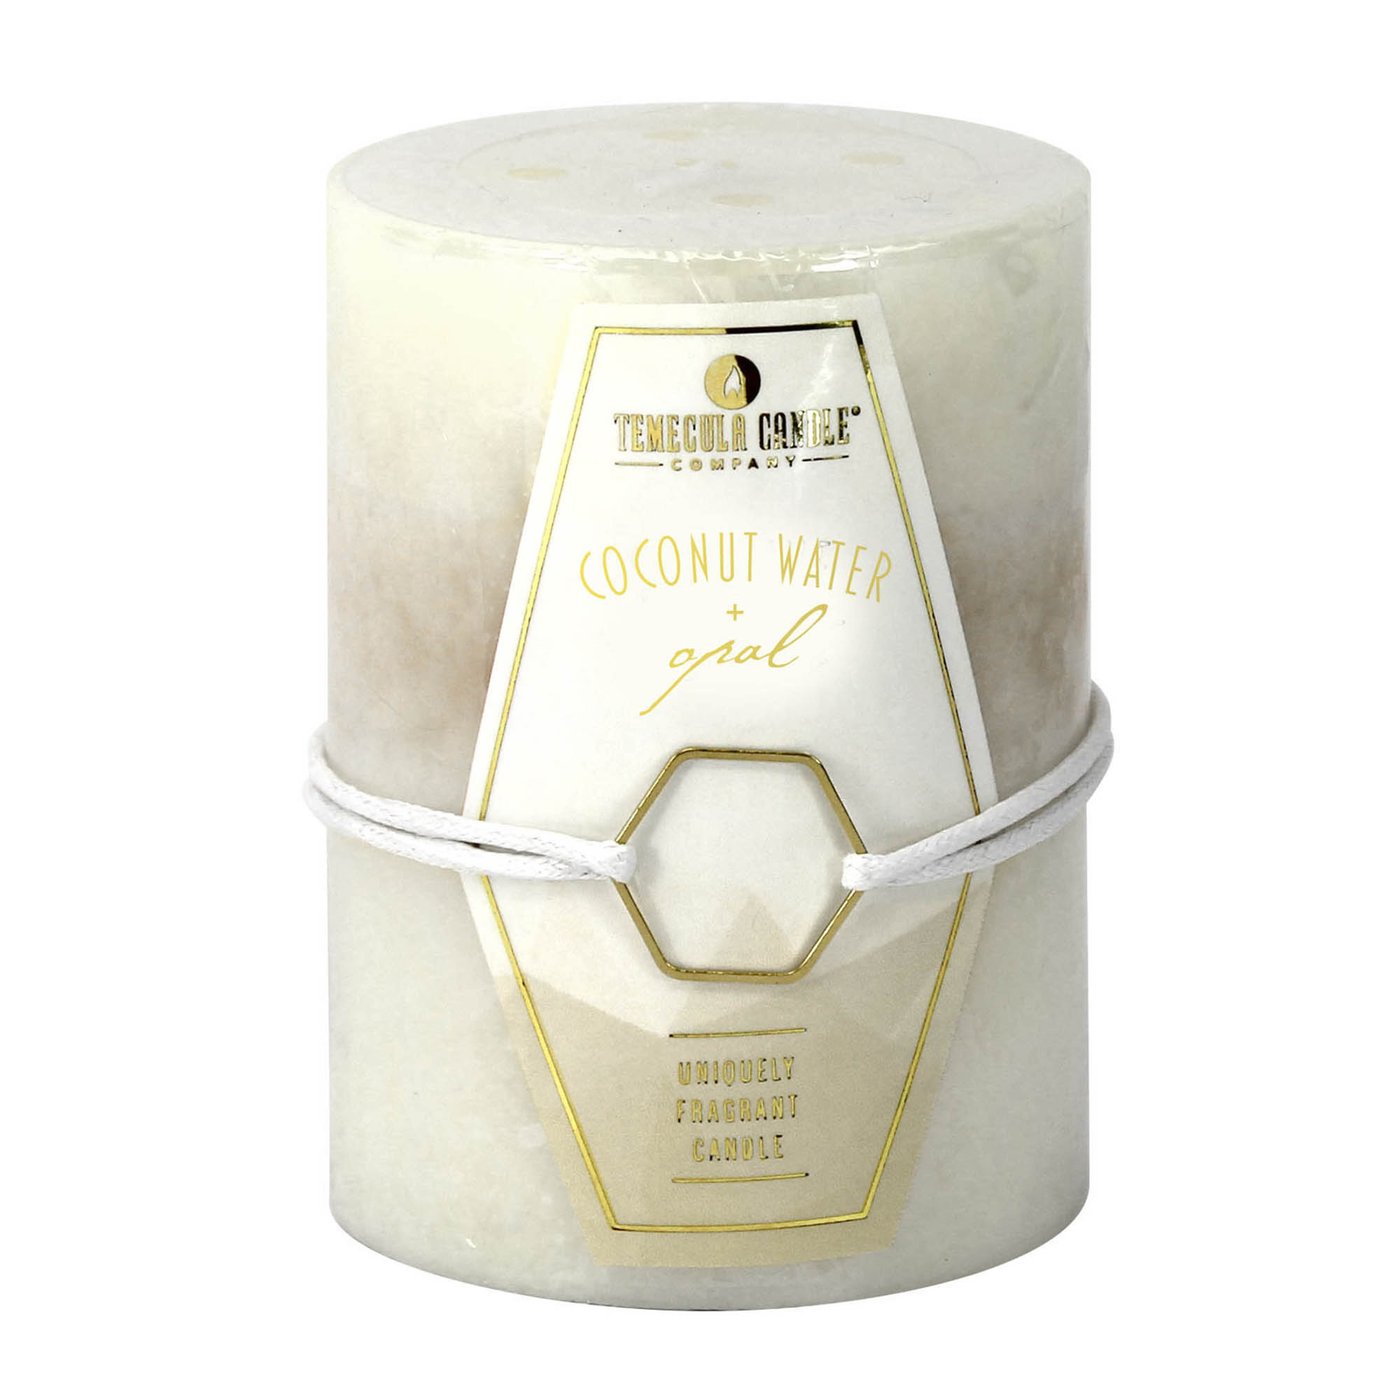 COCONUT WATER & OPAL PILLAR CANDLE 3X4